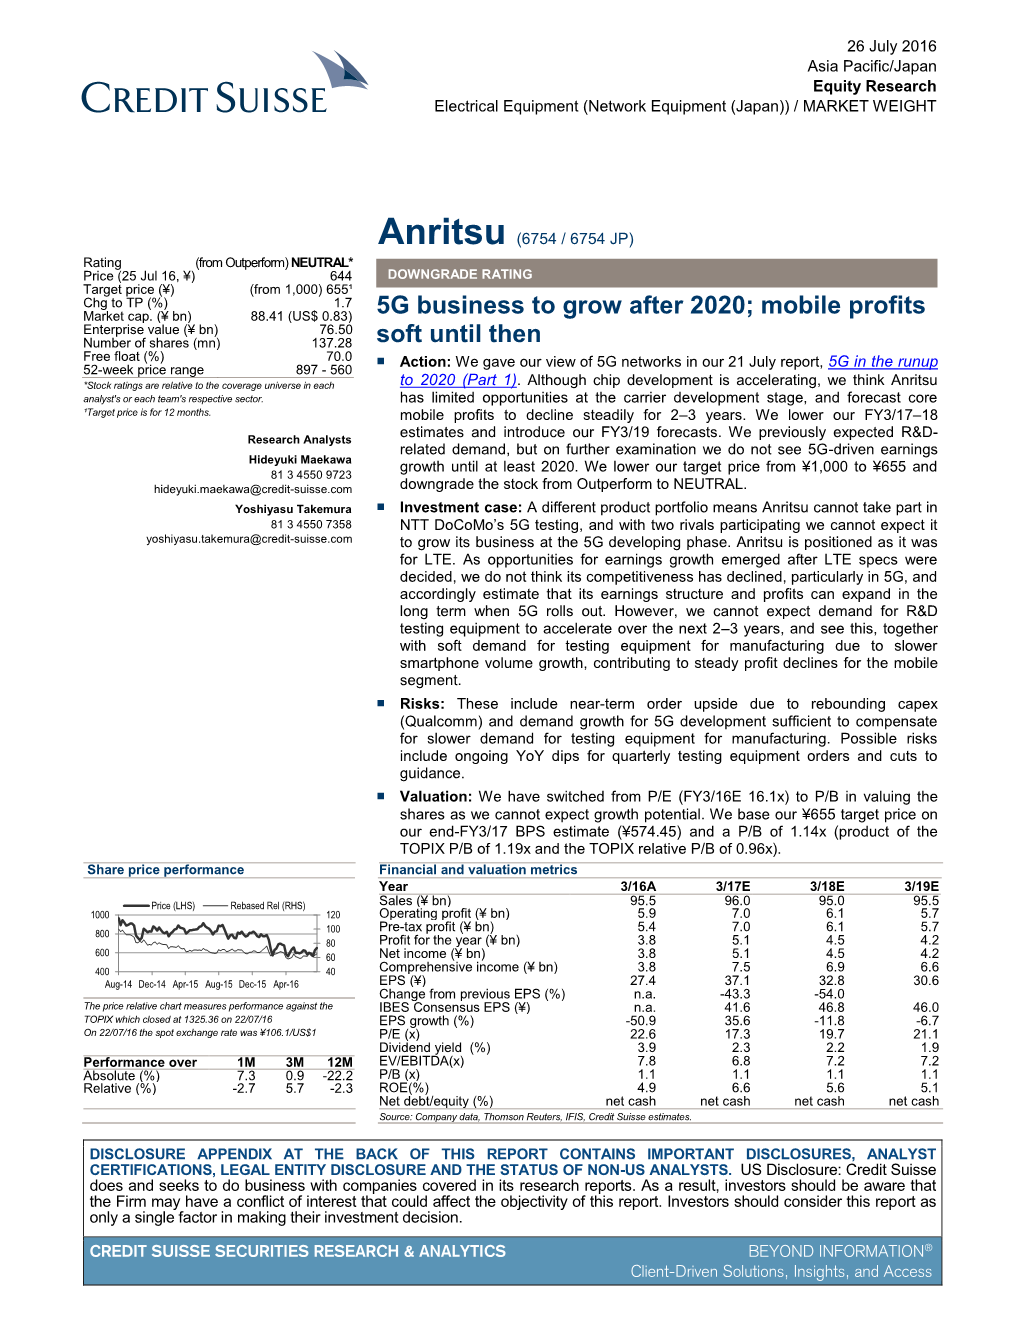 Anritsu (6754 / 6754 JP) Rating (From Outperform) NEUTRAL* Price (25 Jul 16, ¥) 644 DOWNGRADE RATING Target Price (¥) (From 1,000) 655¹ Chg to TP (%) 1.7 Market Cap